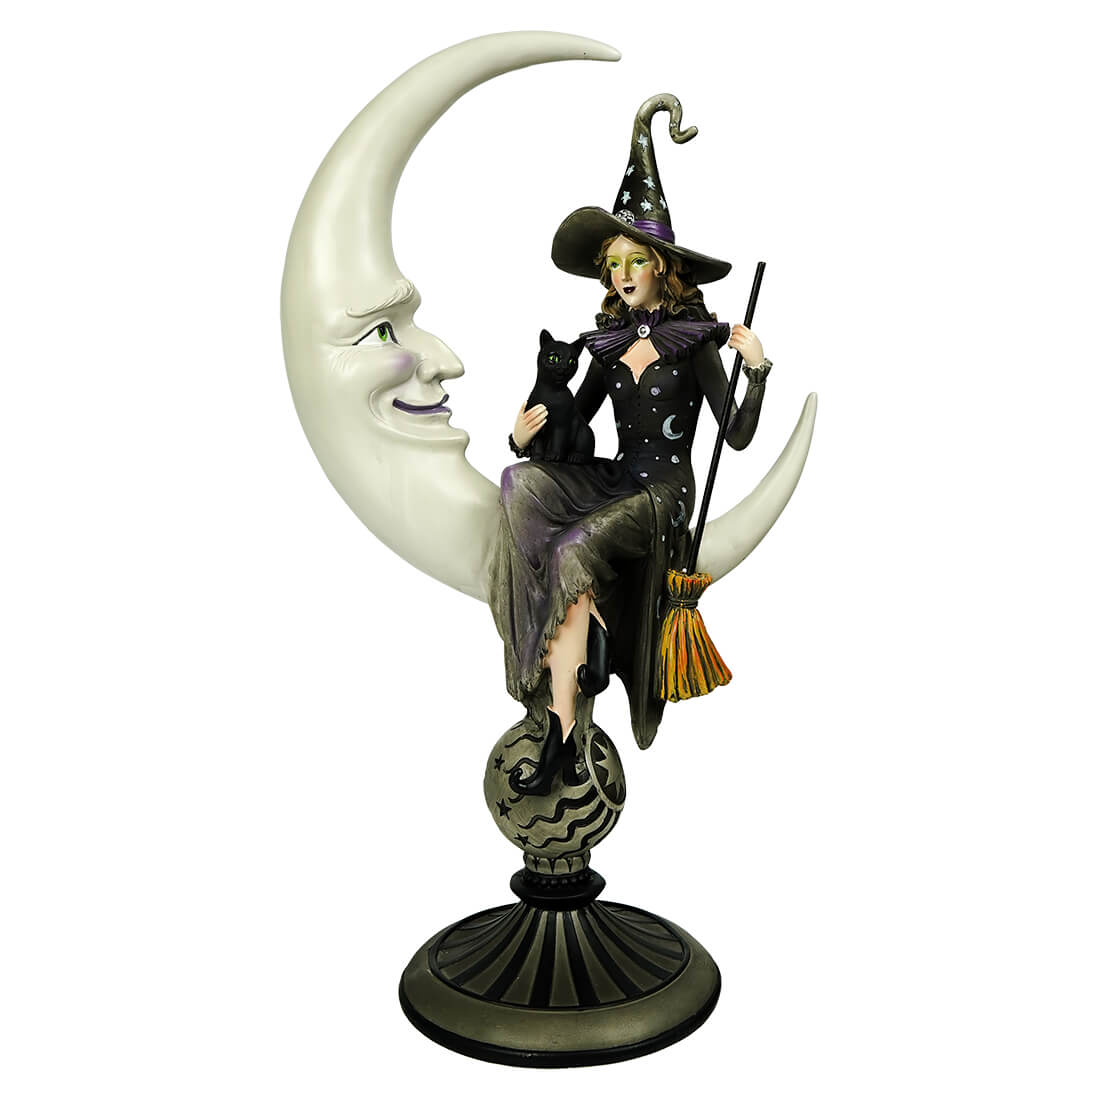 Crescent Moon With Sitting Witch & Black Cat On Pedestal